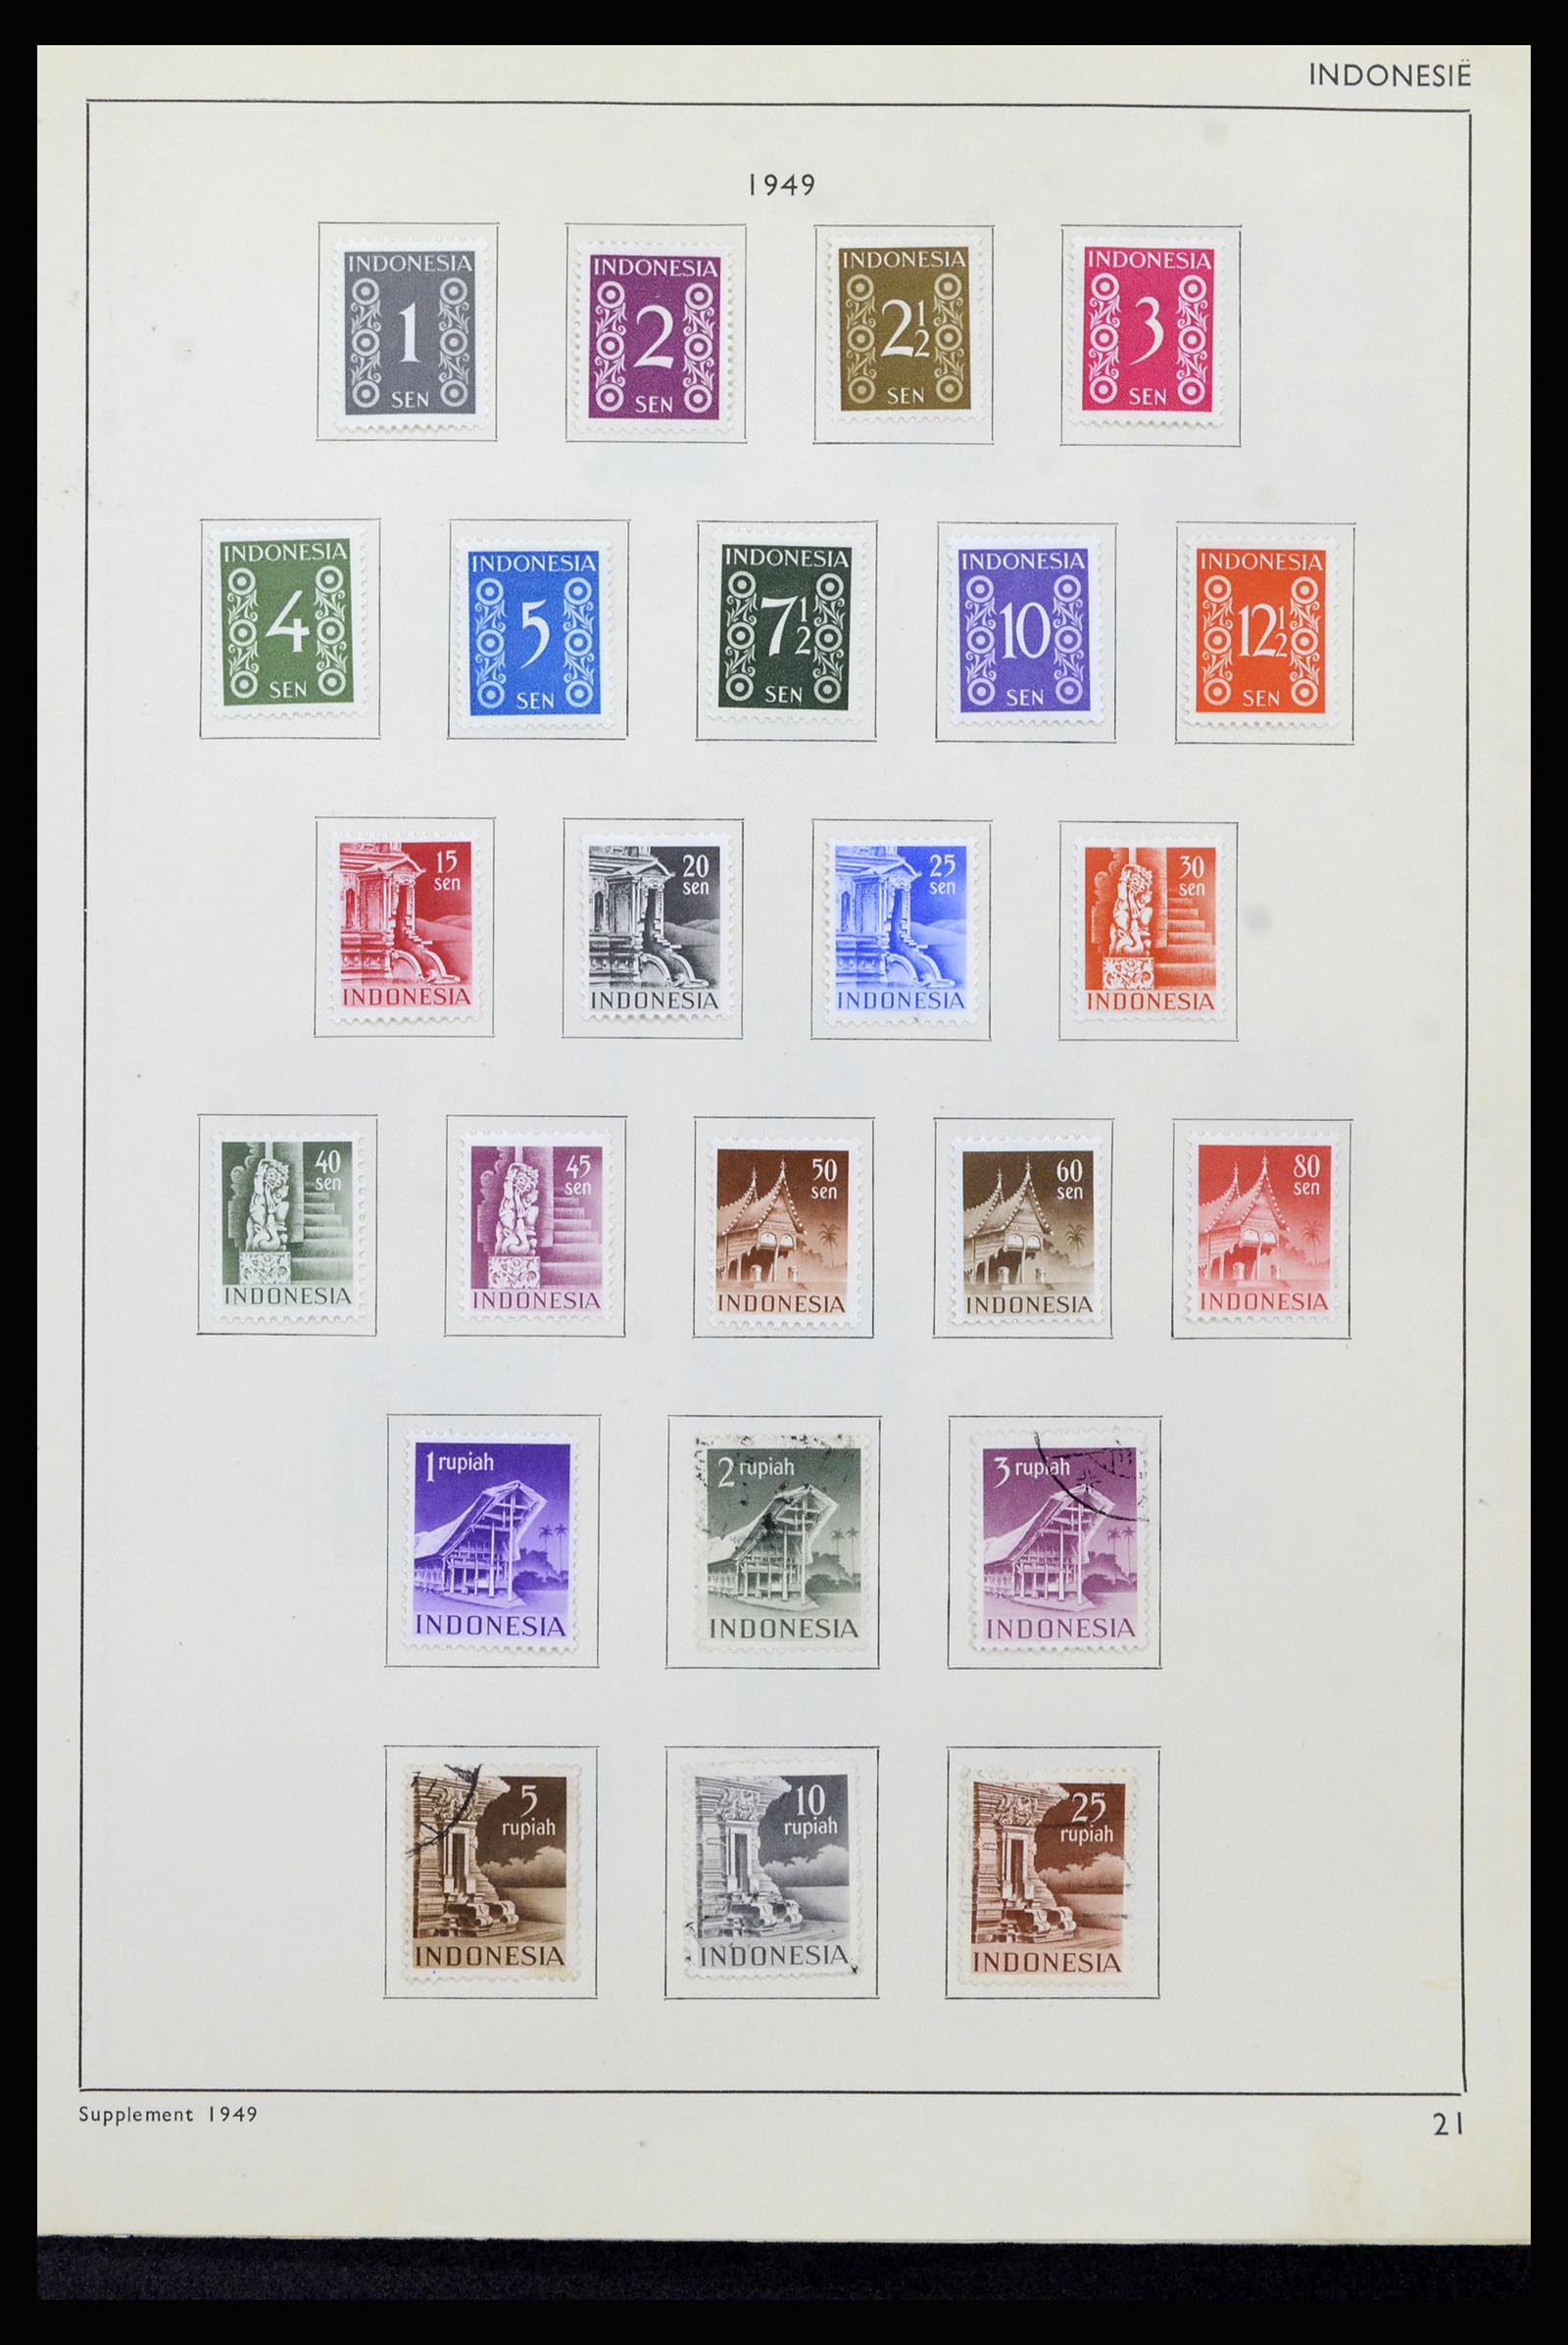 37217 020 - Stamp collection 37217 Dutch territories 1864-1975.